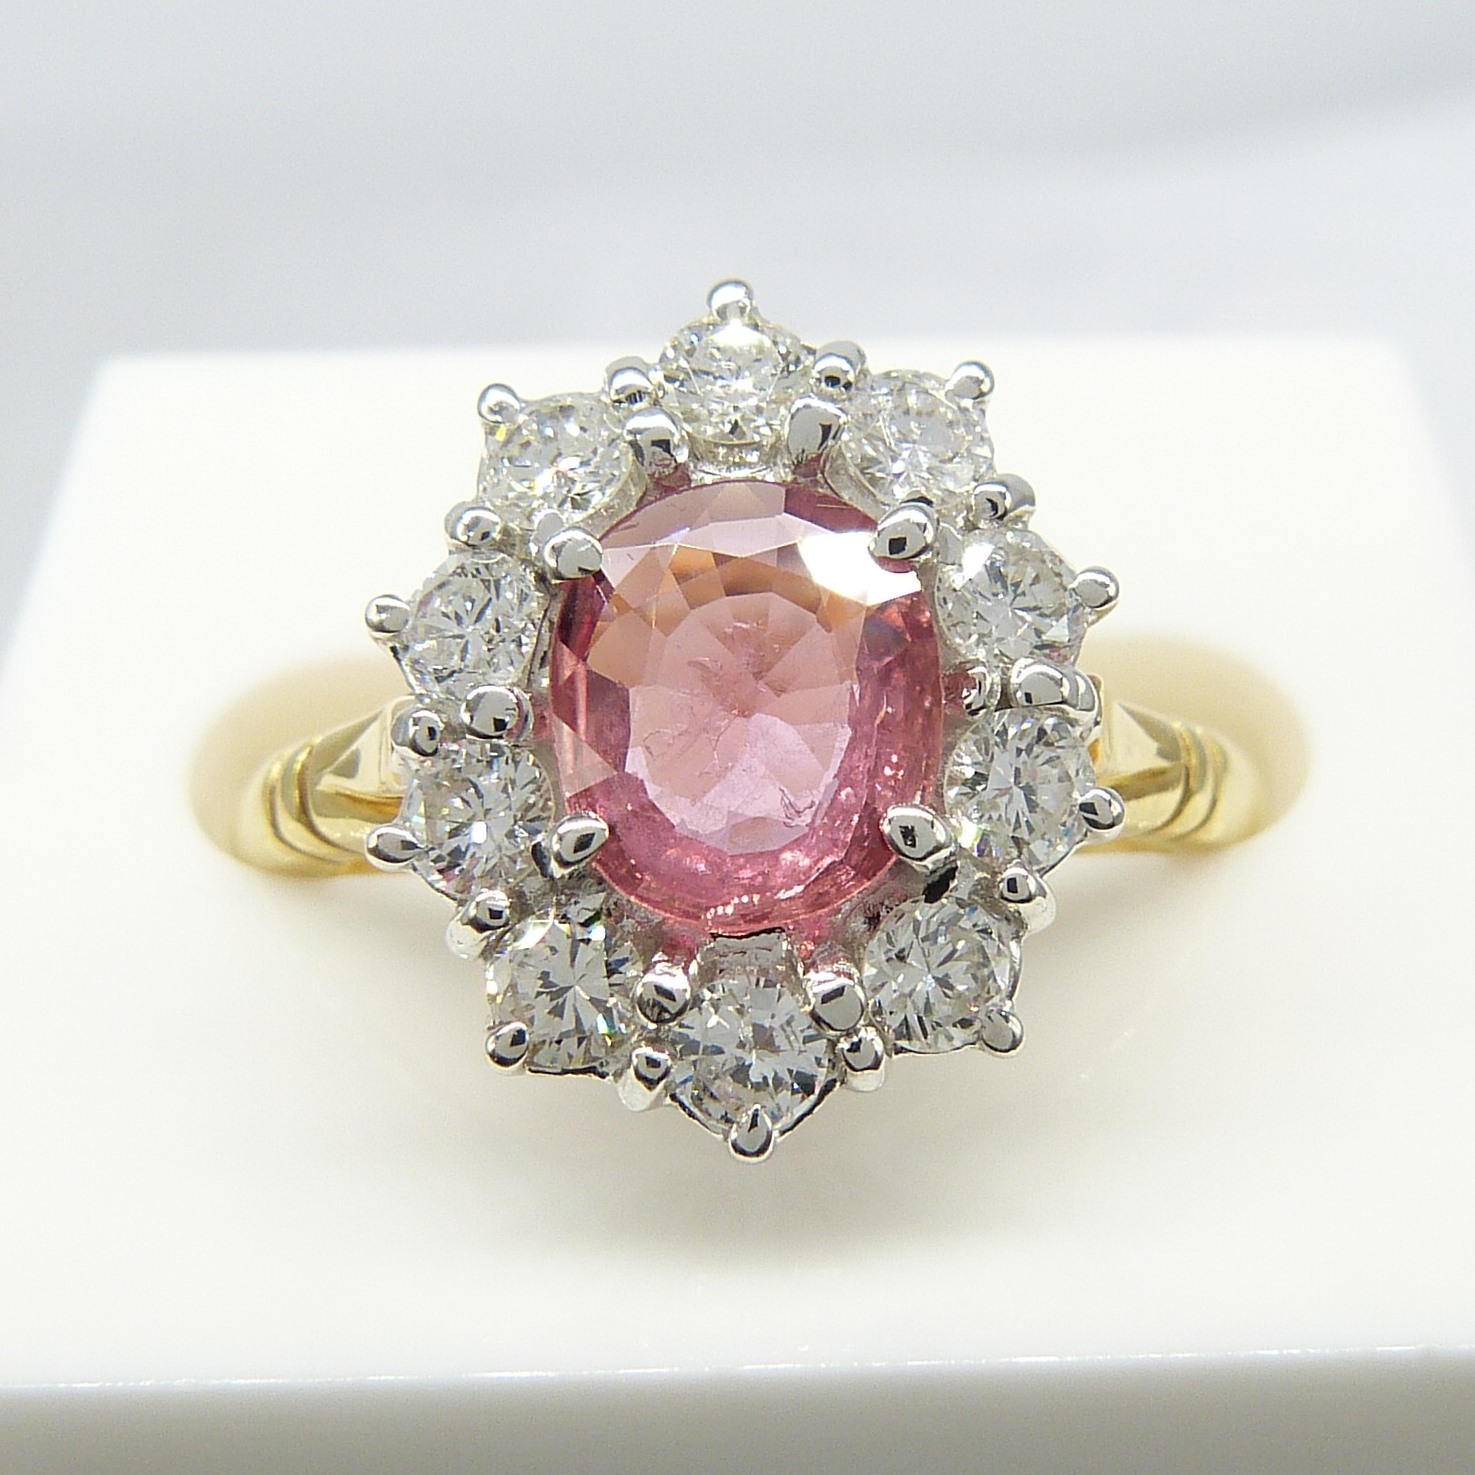 A pinkish-red natural Ruby and Diamond cluster ring in 18ct yellow and white Gold - Image 6 of 10